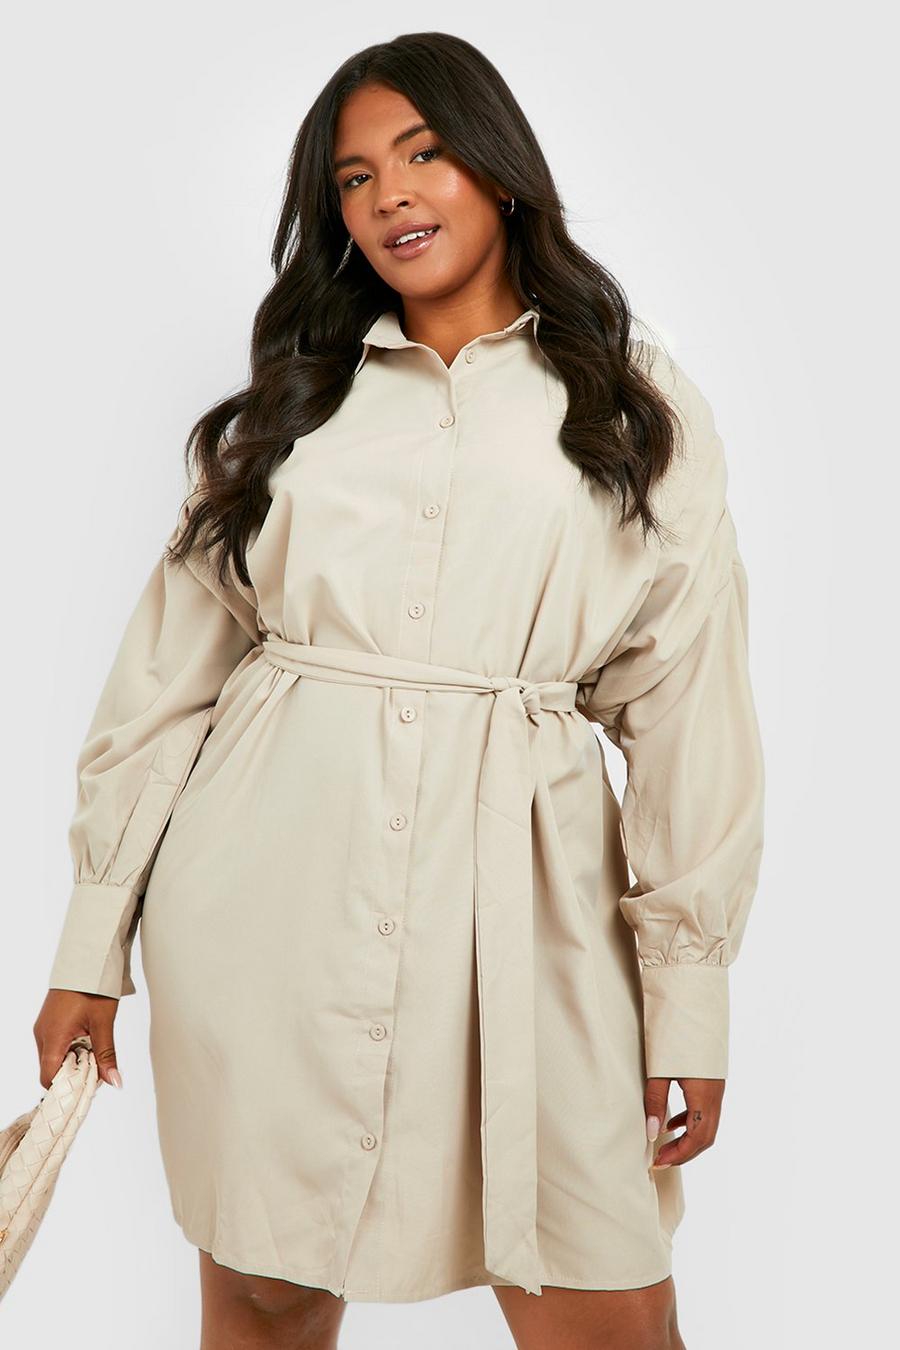 Boohoo Women Clothing Dresses Casual Dresses Womens Plus Oversized Cotton Belted Shirt Dress 12 